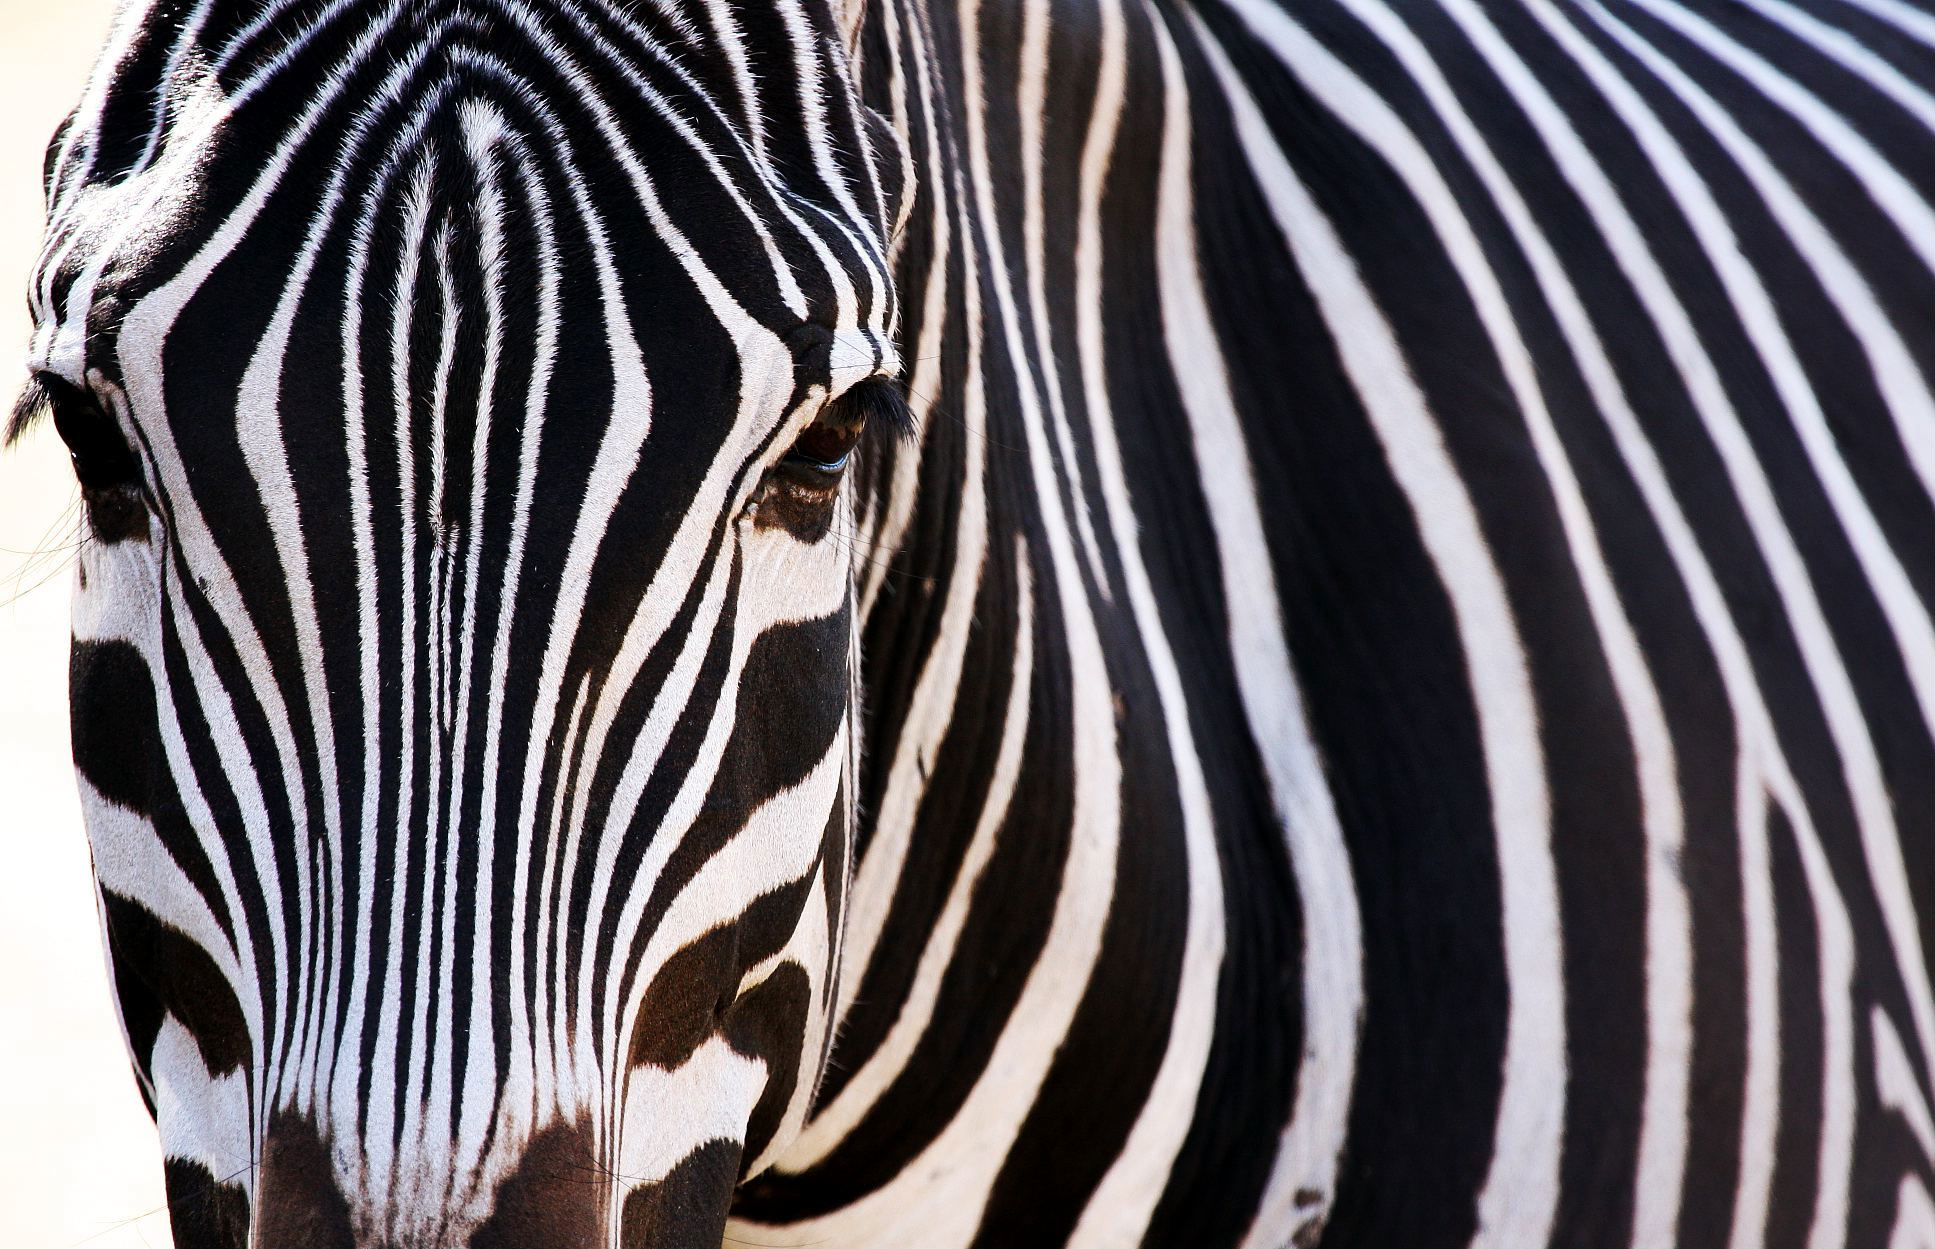 Download Zebra wallpapers for mobile phone free Zebra HD pictures